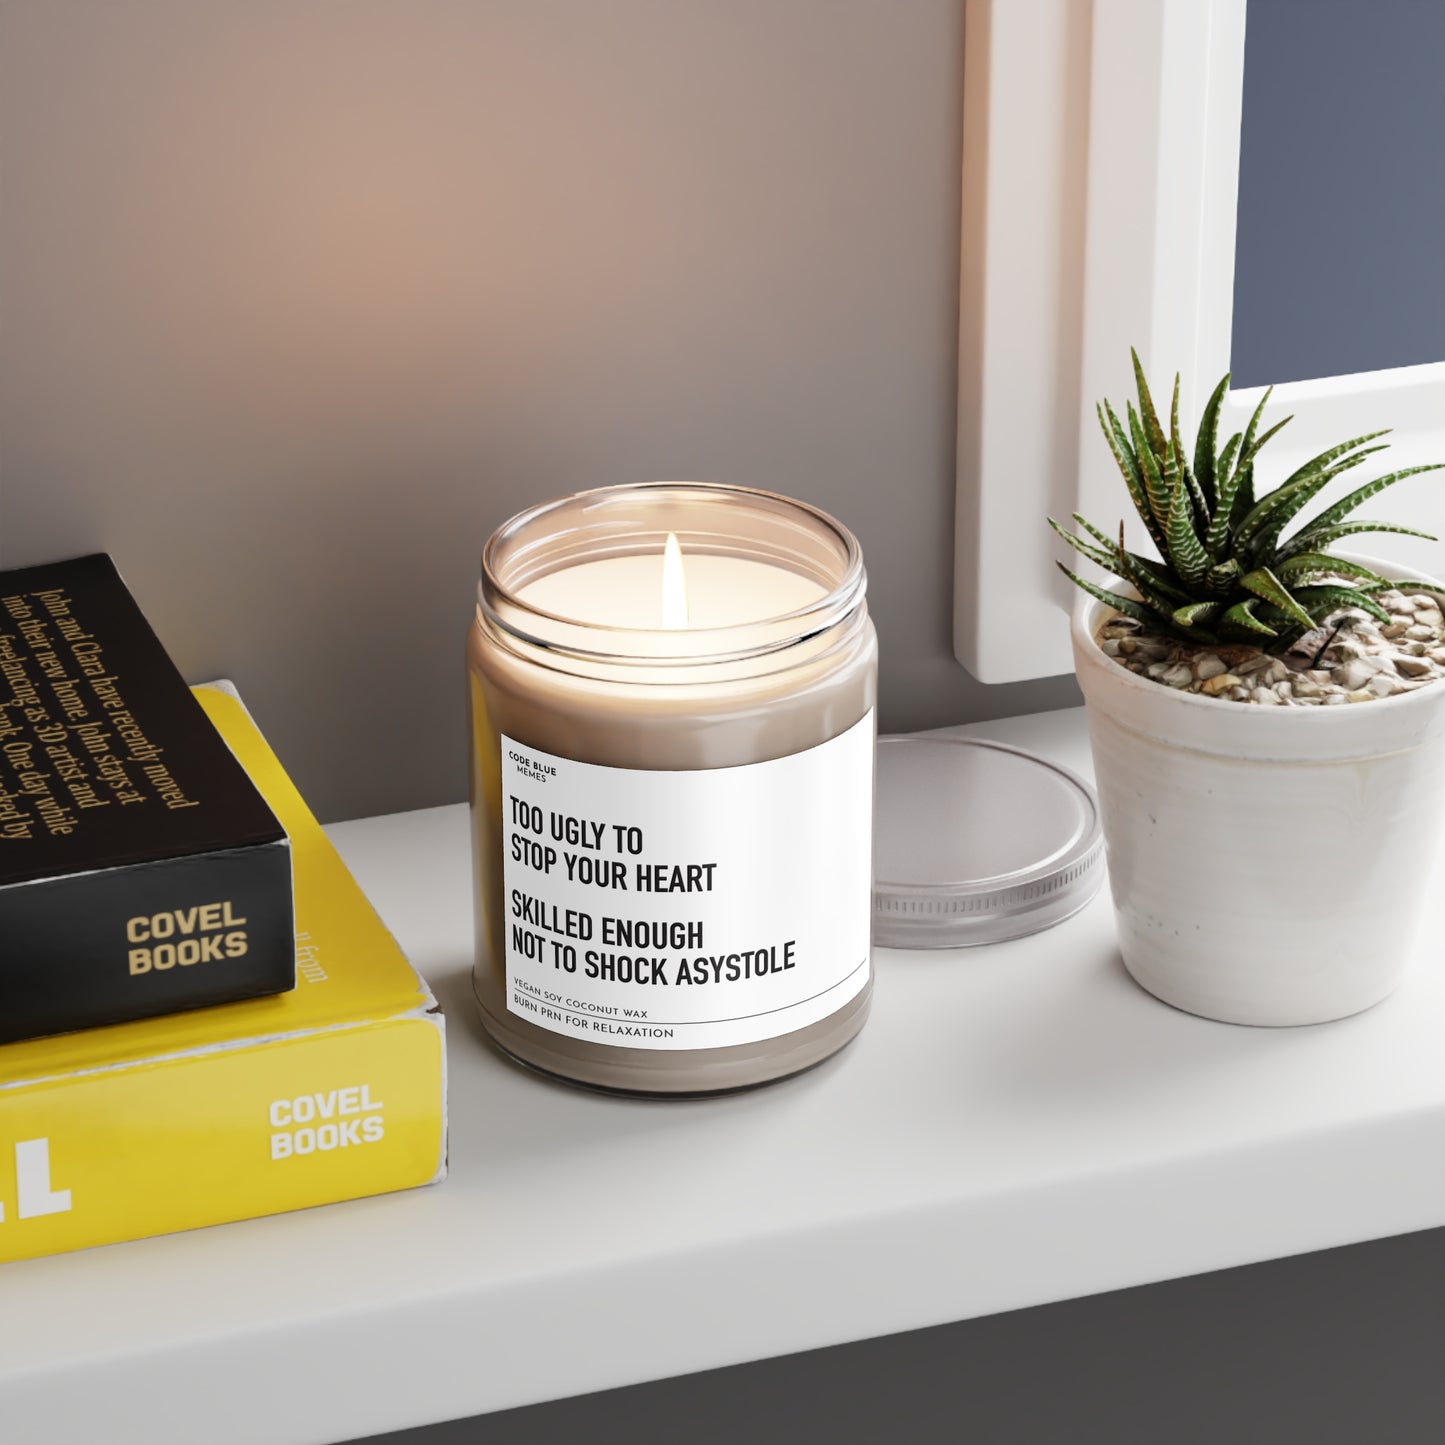 Too Ugly to Stop Your heart, Skilled Enough Not To Shock Asystole - Scented Candle